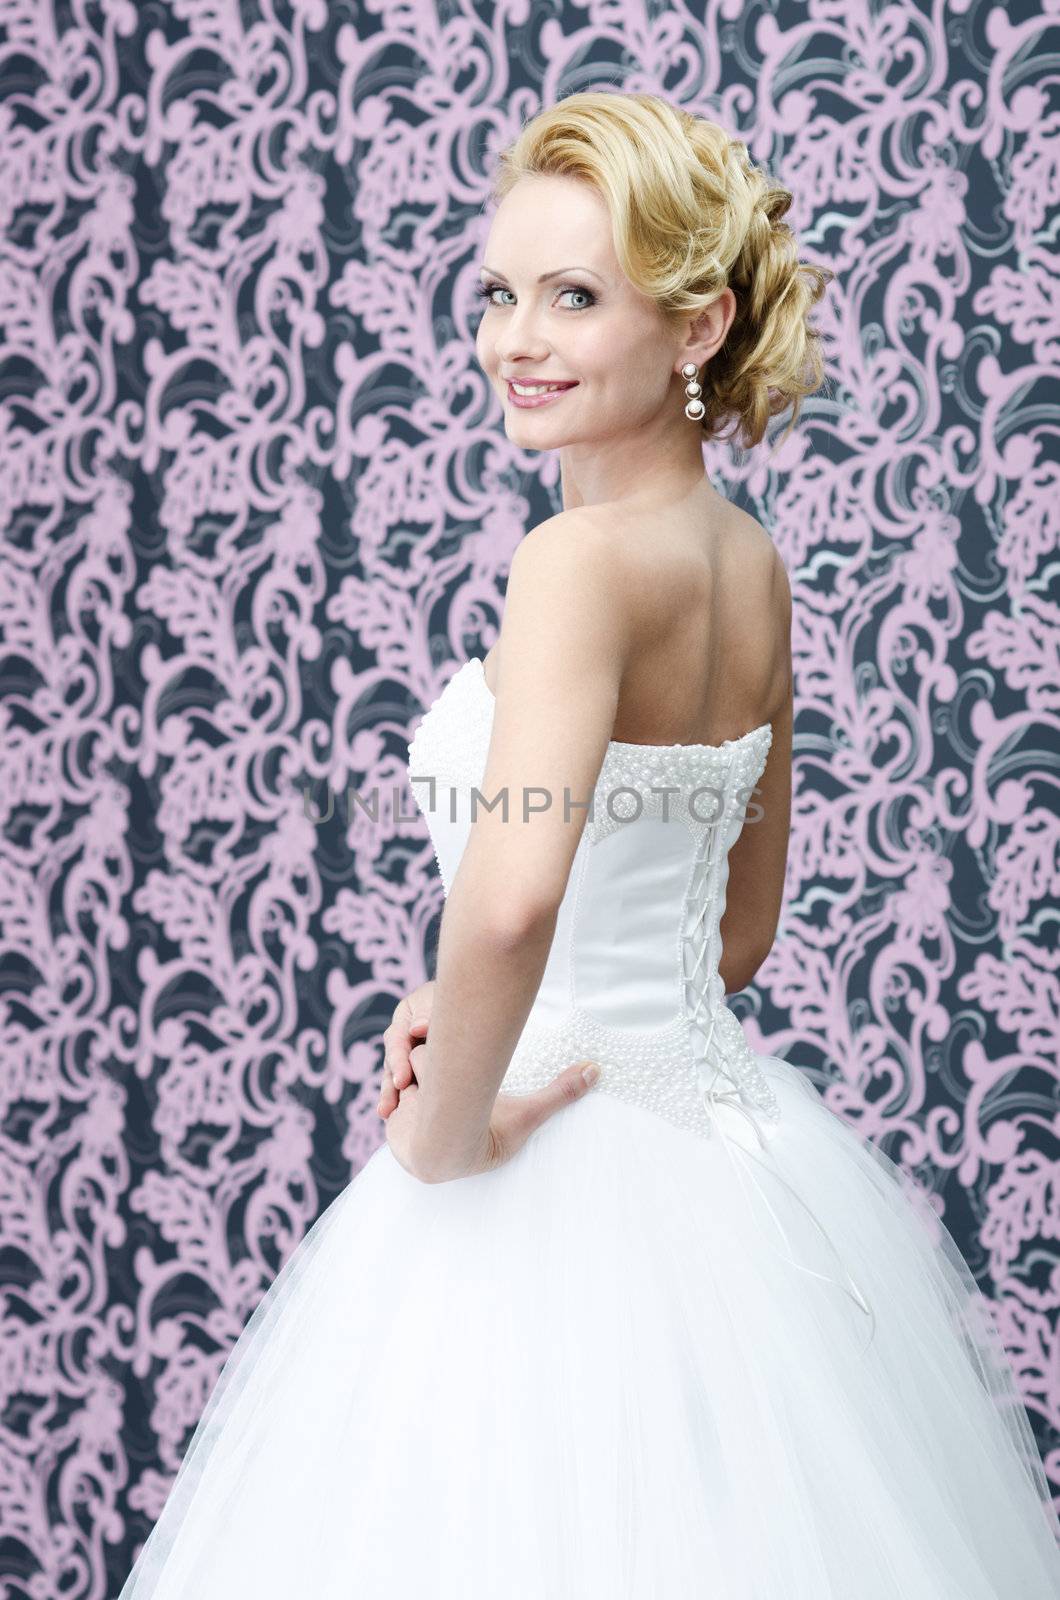 20s yeared bride in white dress is looking back over the shoulder with smile on her face